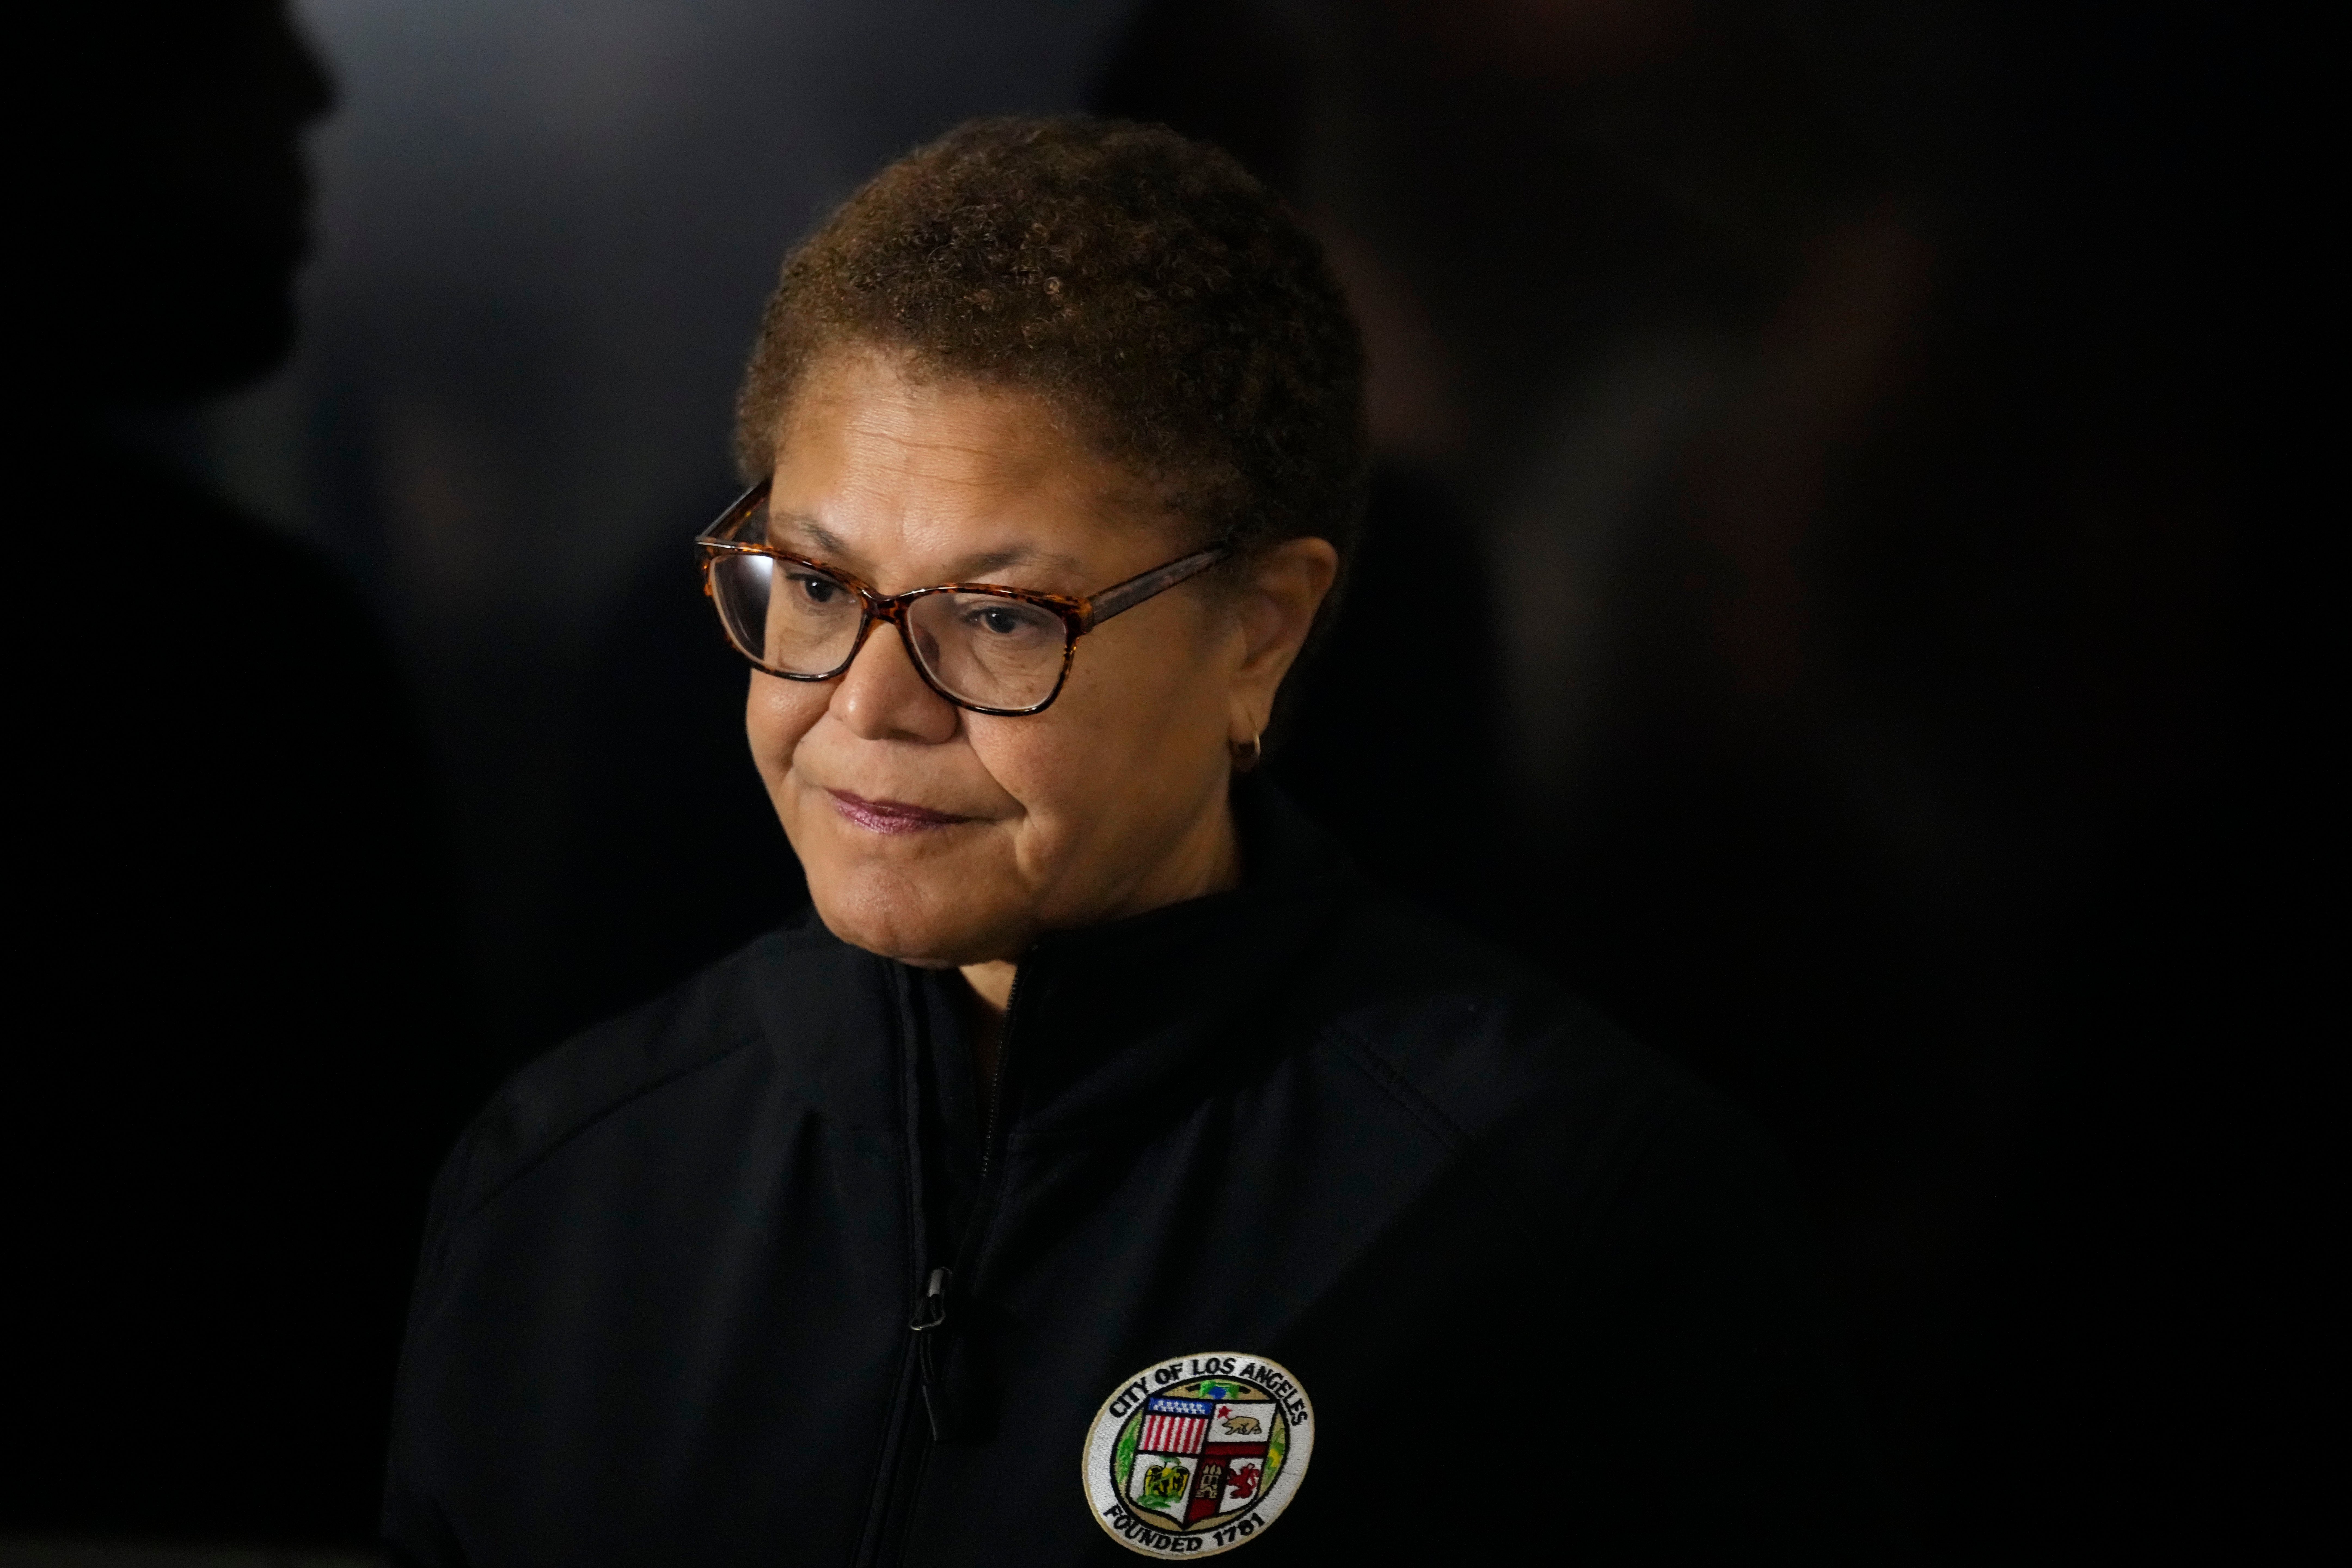 The residence of Los Angeles mayor Karen Bass was broken into on Sunday morning